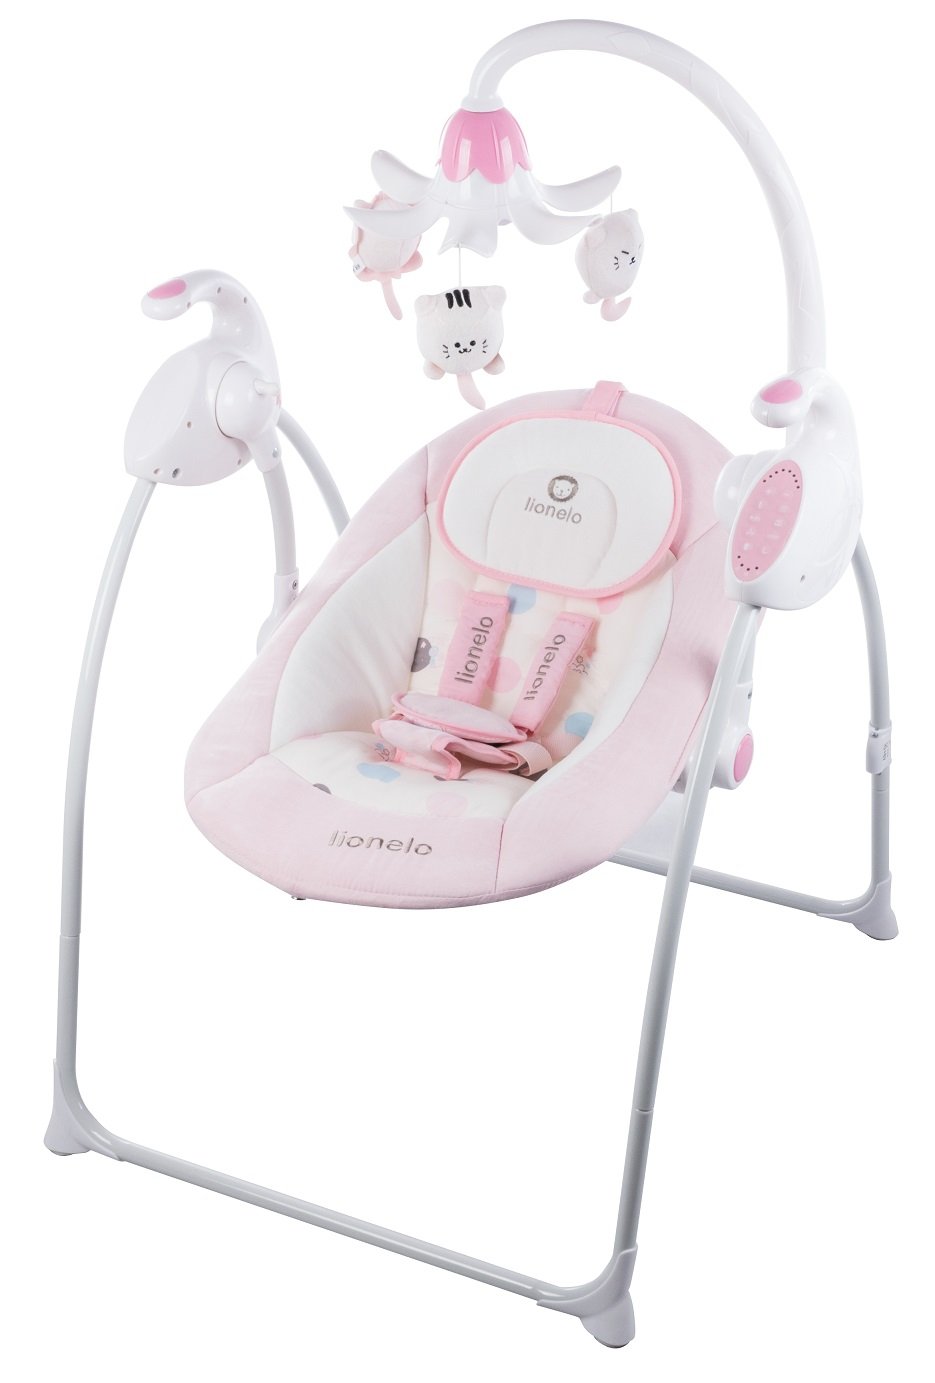 Lionelo Robin Electric Baby Rocker with Reclining Function, Baby Swing 0 to 9 kg, Mosquito Net, 12 Melodies, 8 Rocking Speeds, Music Box with Light Projector, beige